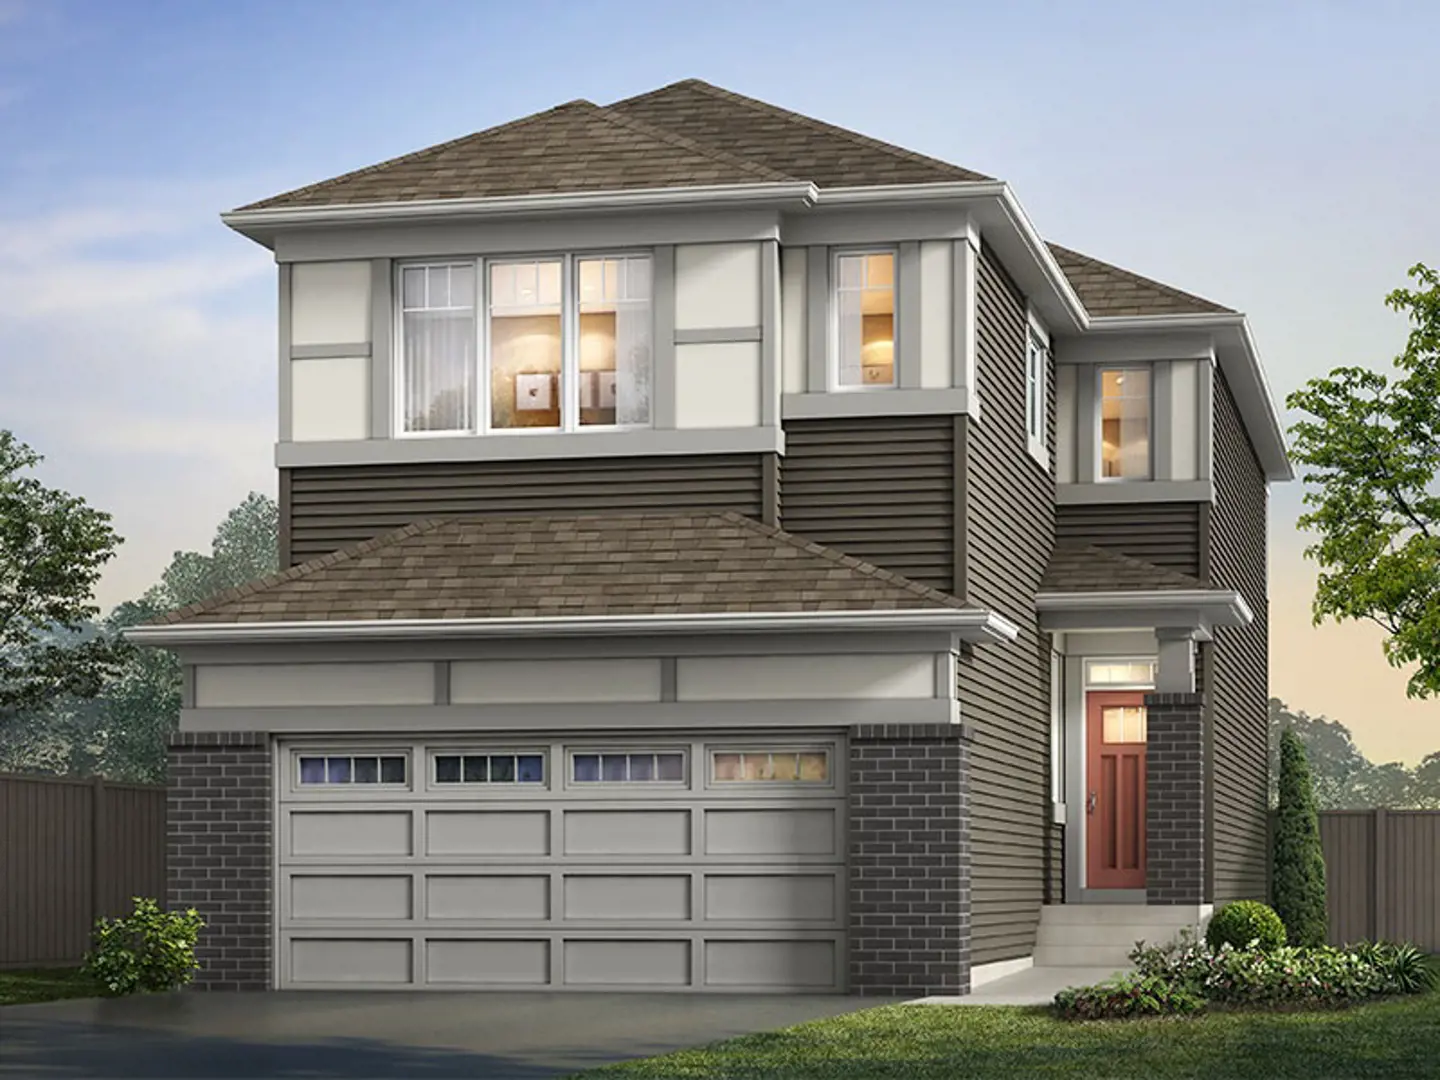 The Orchards at Ellerslie Homes by Avi located at 2360 Chokecherry Close Southwest, Edmonton, AB image